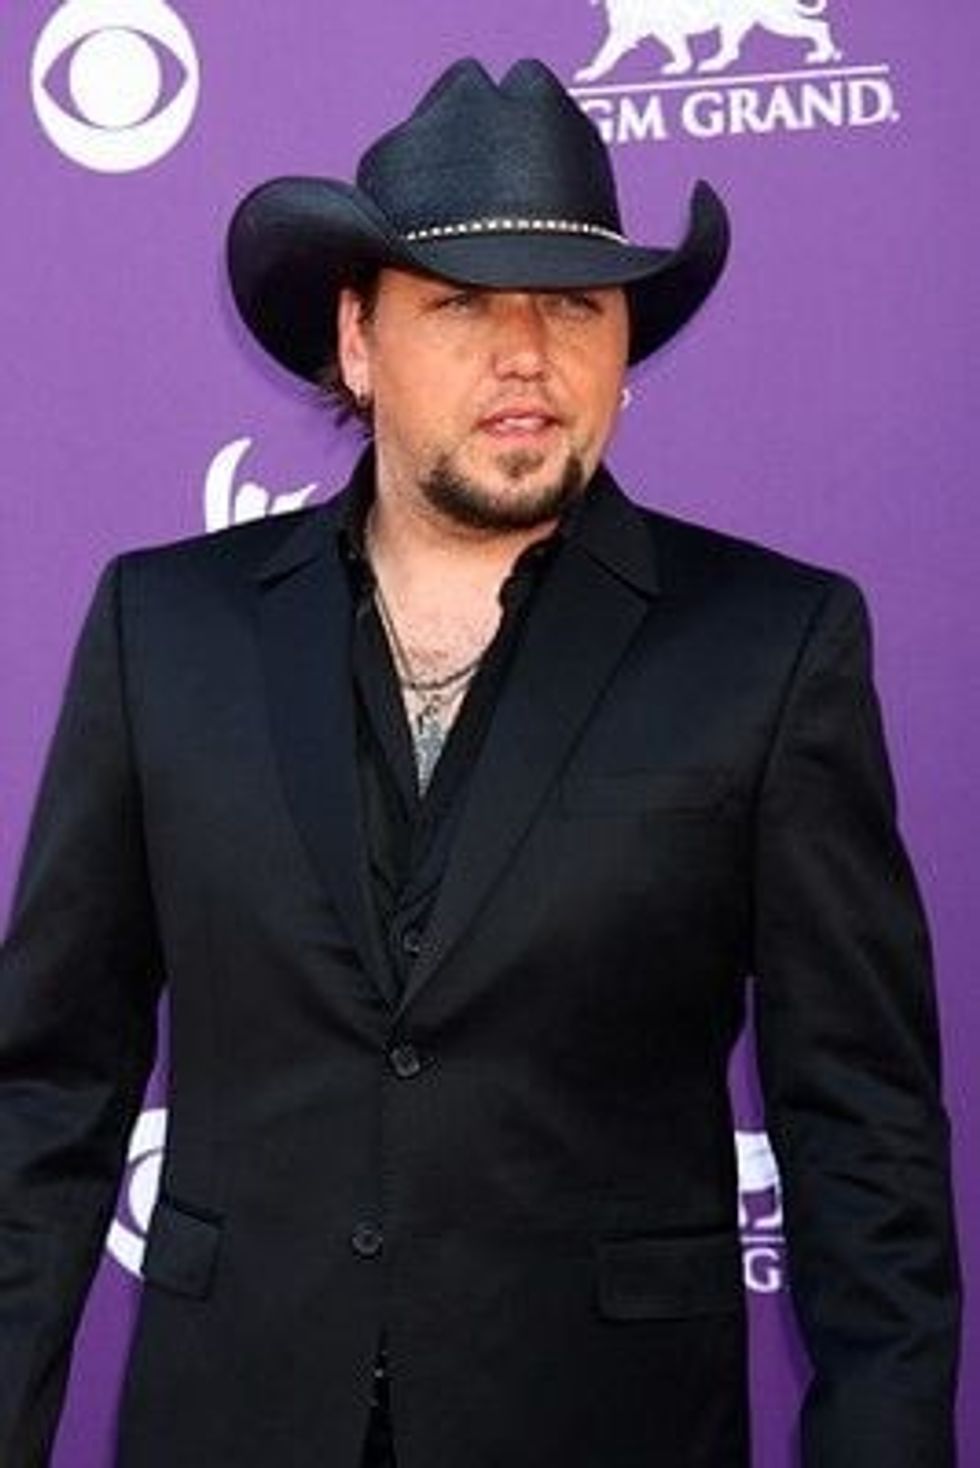 A picture of Jason Aldean wearing a black shirt, suit, and hat